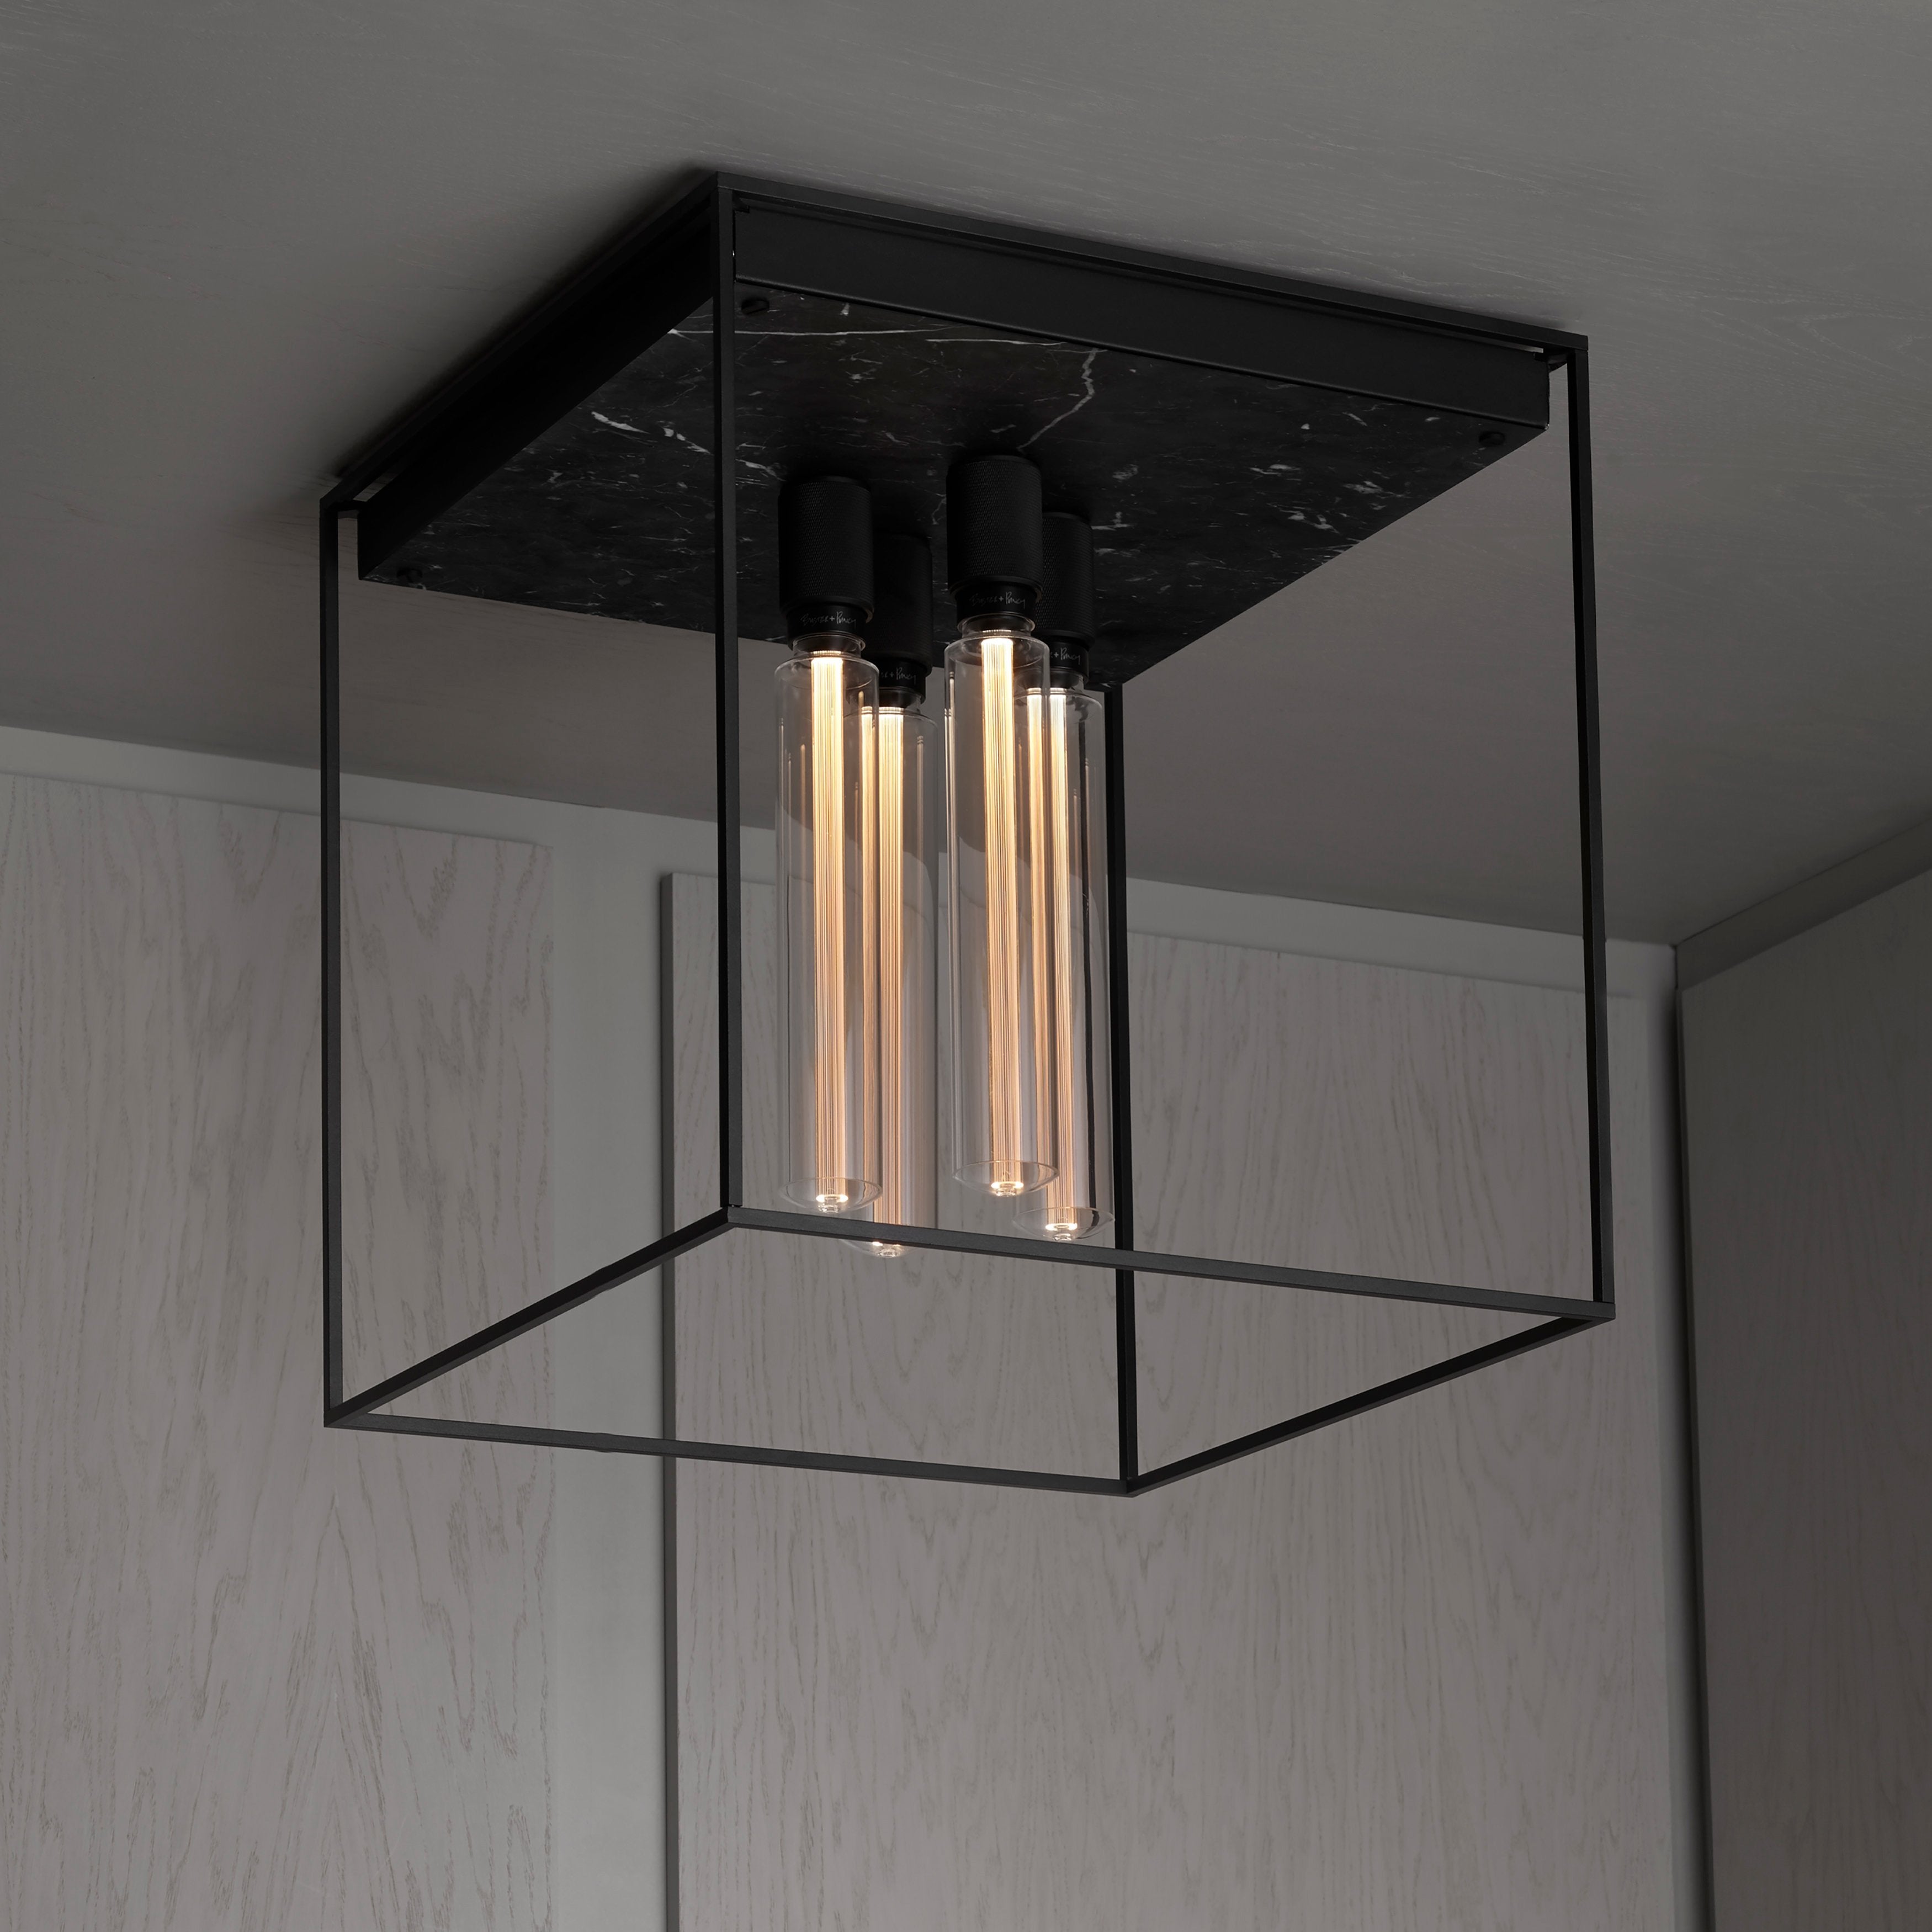 Buster and Punch CAGED CEILING 4.0 / BLACK MARBLE - No.42 Interiors